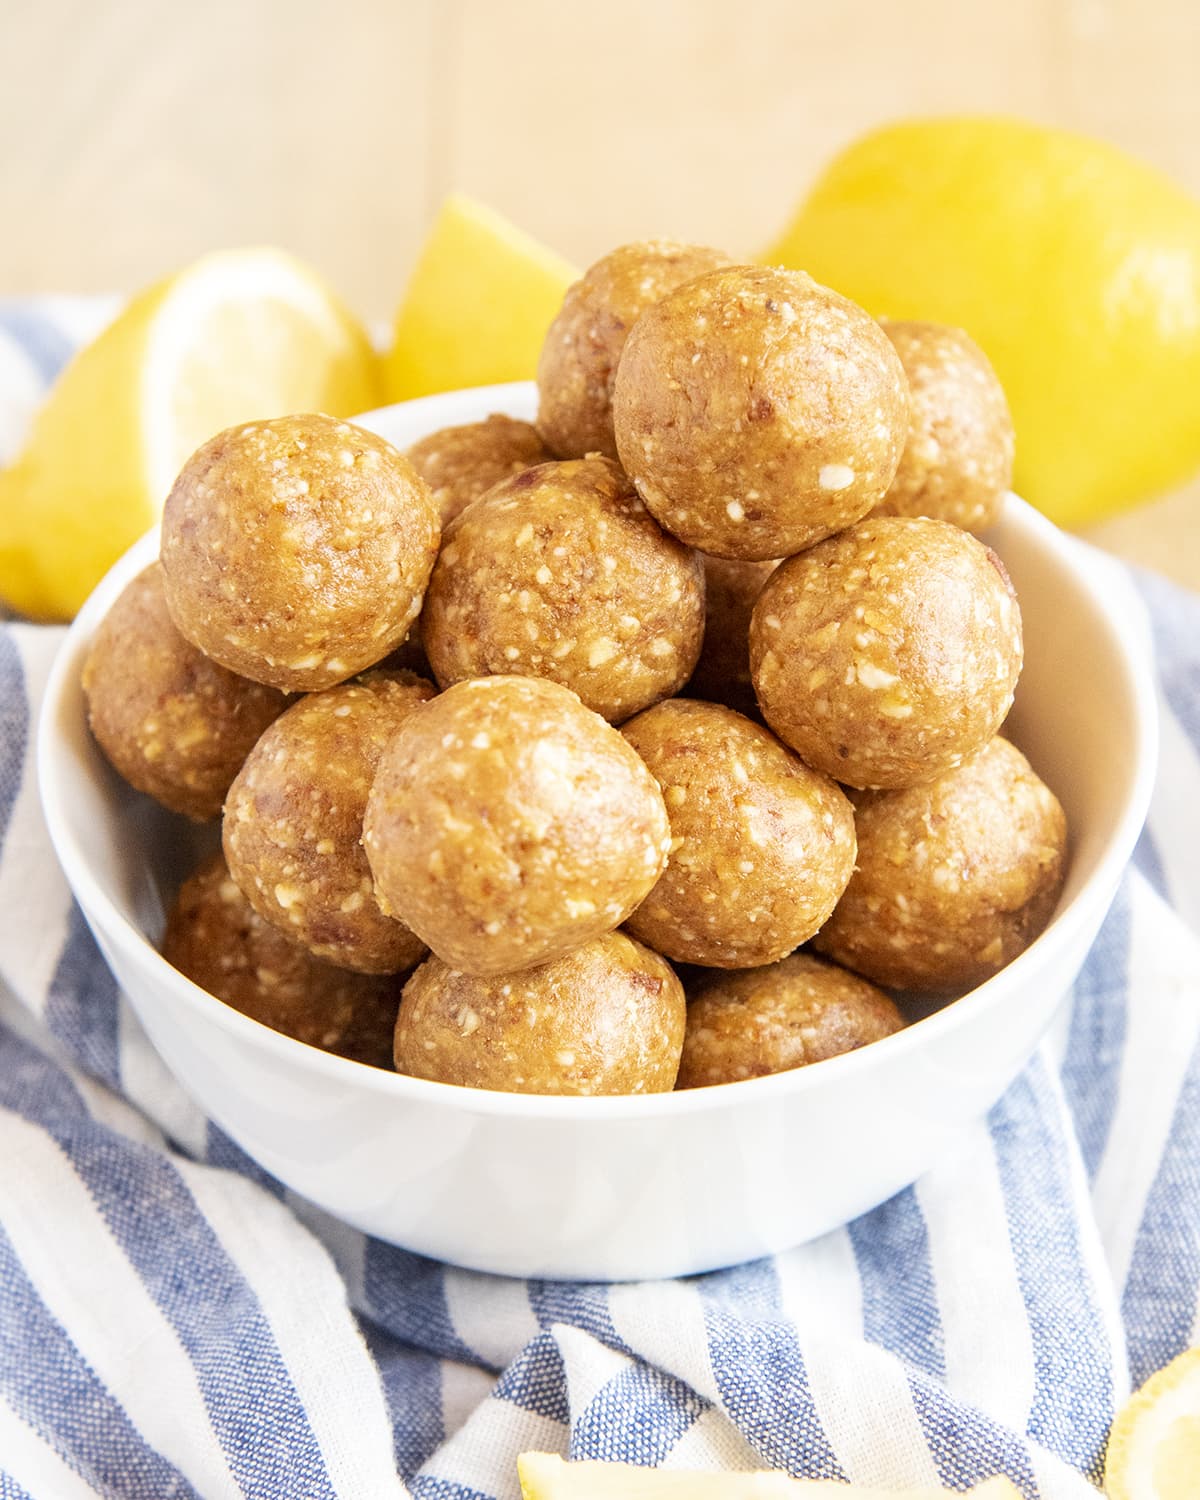 A white bowl full of lemon energy balls on a blue and white striped cloth.